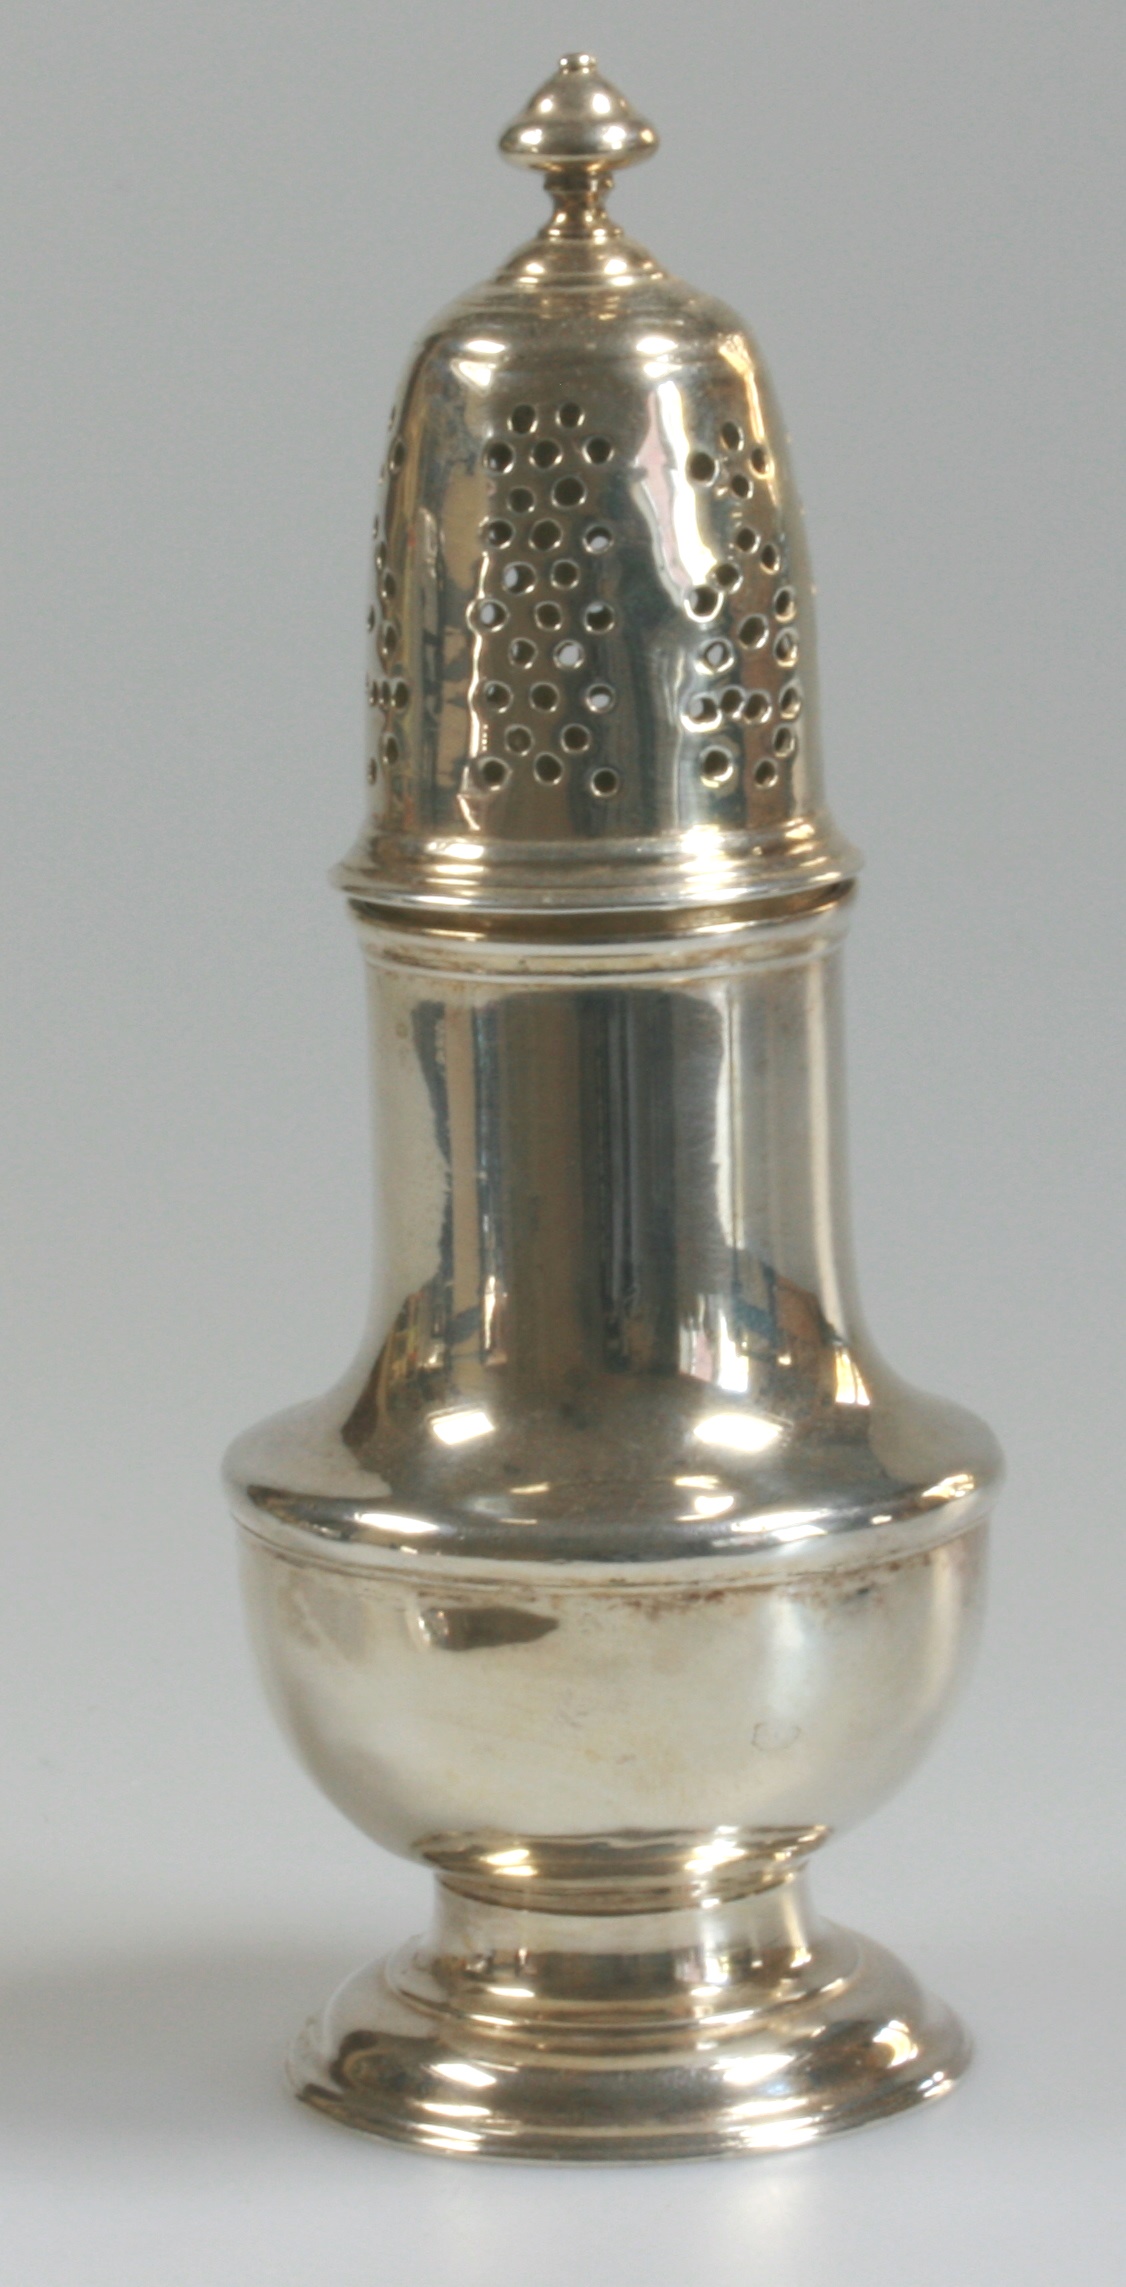 A George II Silver Pepper Caster. Samuel Wood, London 1750. Of typical form with pierced